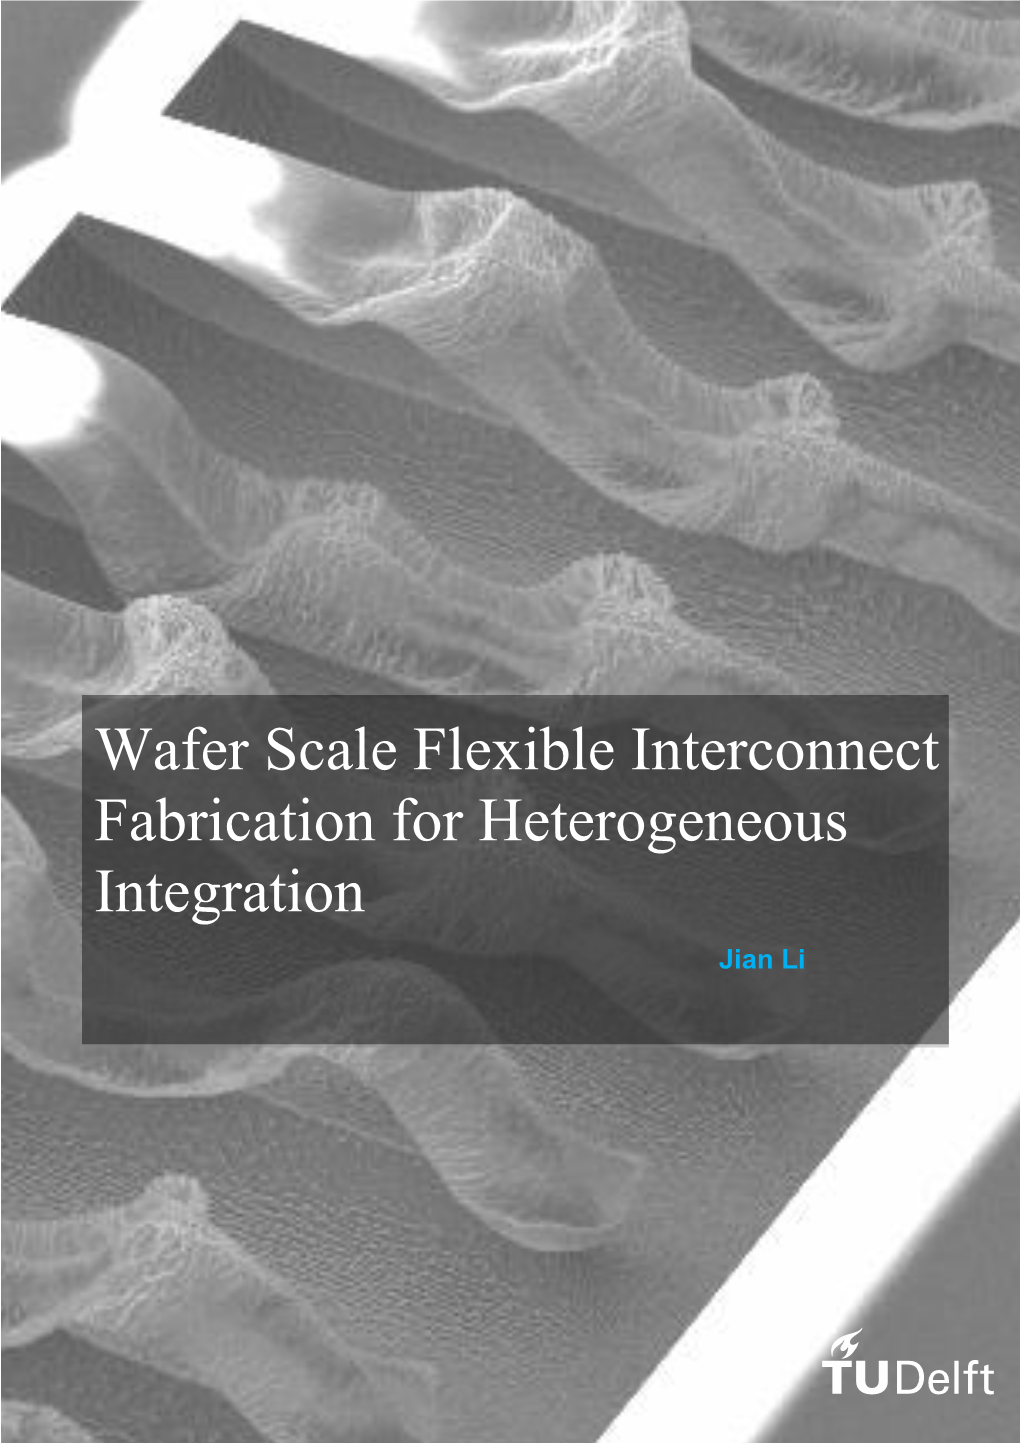 Wafer Scale Flexible Interconnect Fabrication for Heterogeneous